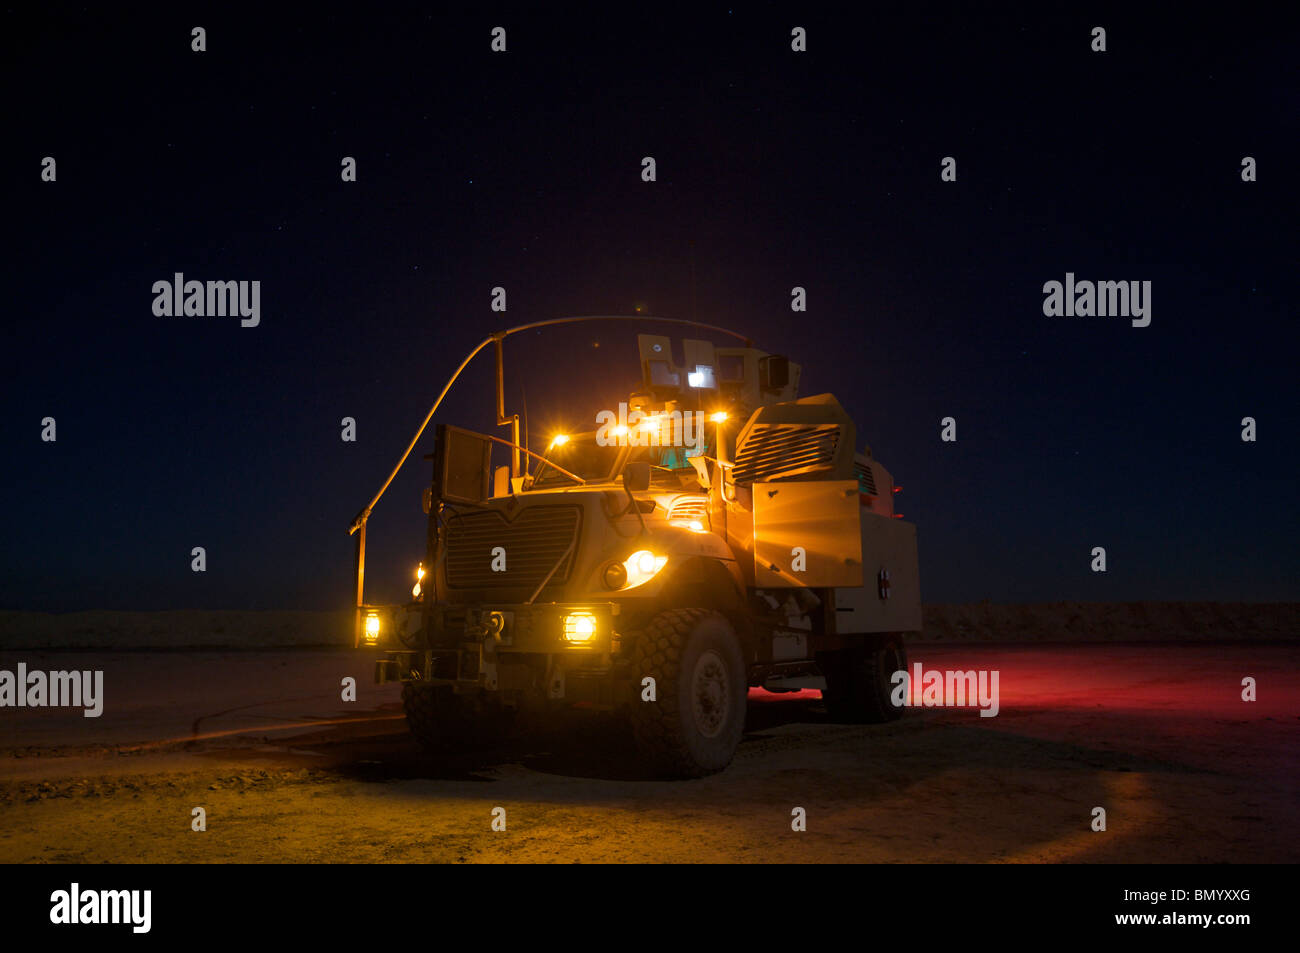 A MaxxPro Mine Resistant Ambush Protected (MRAP) vehicle with running lights on at night. Stock Photo